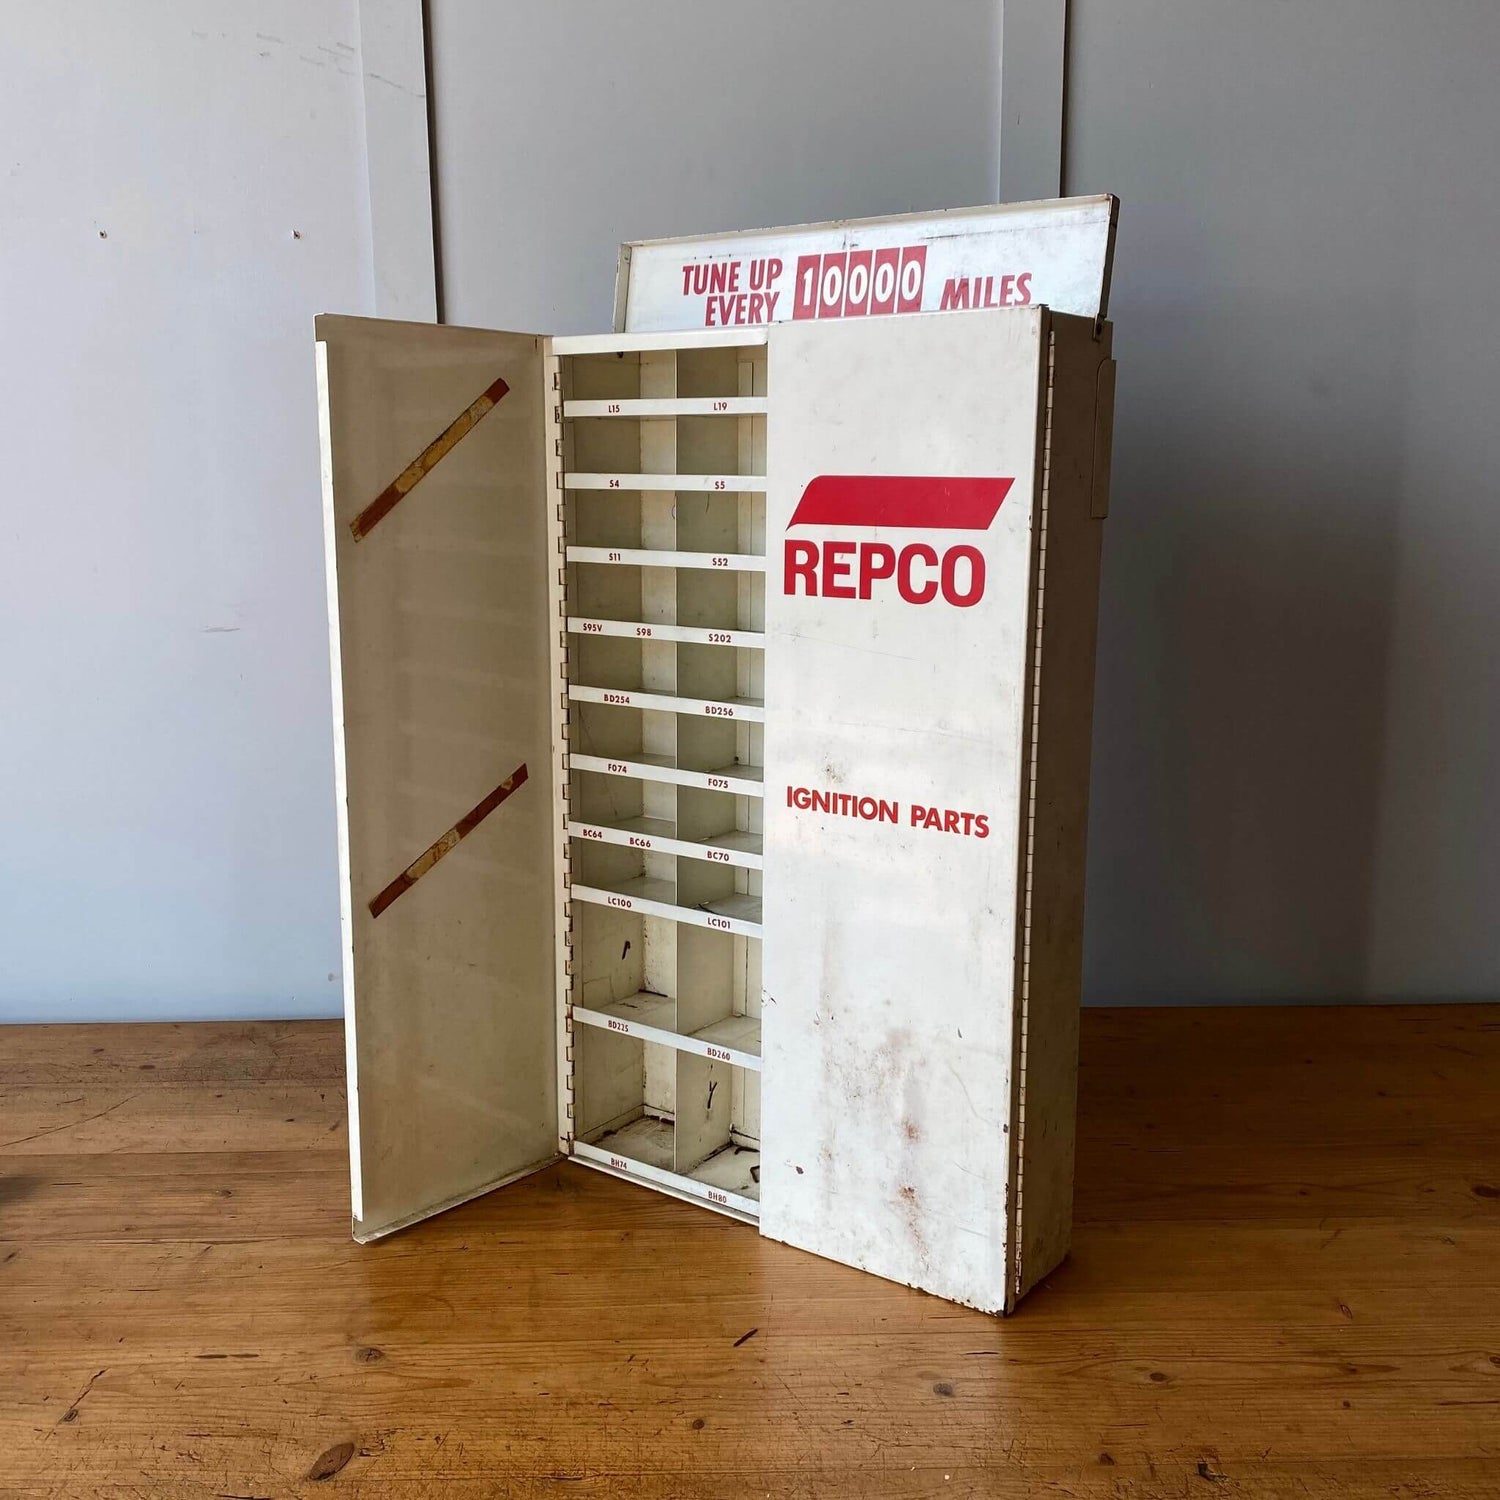 Antique and collectible Repco cabinet